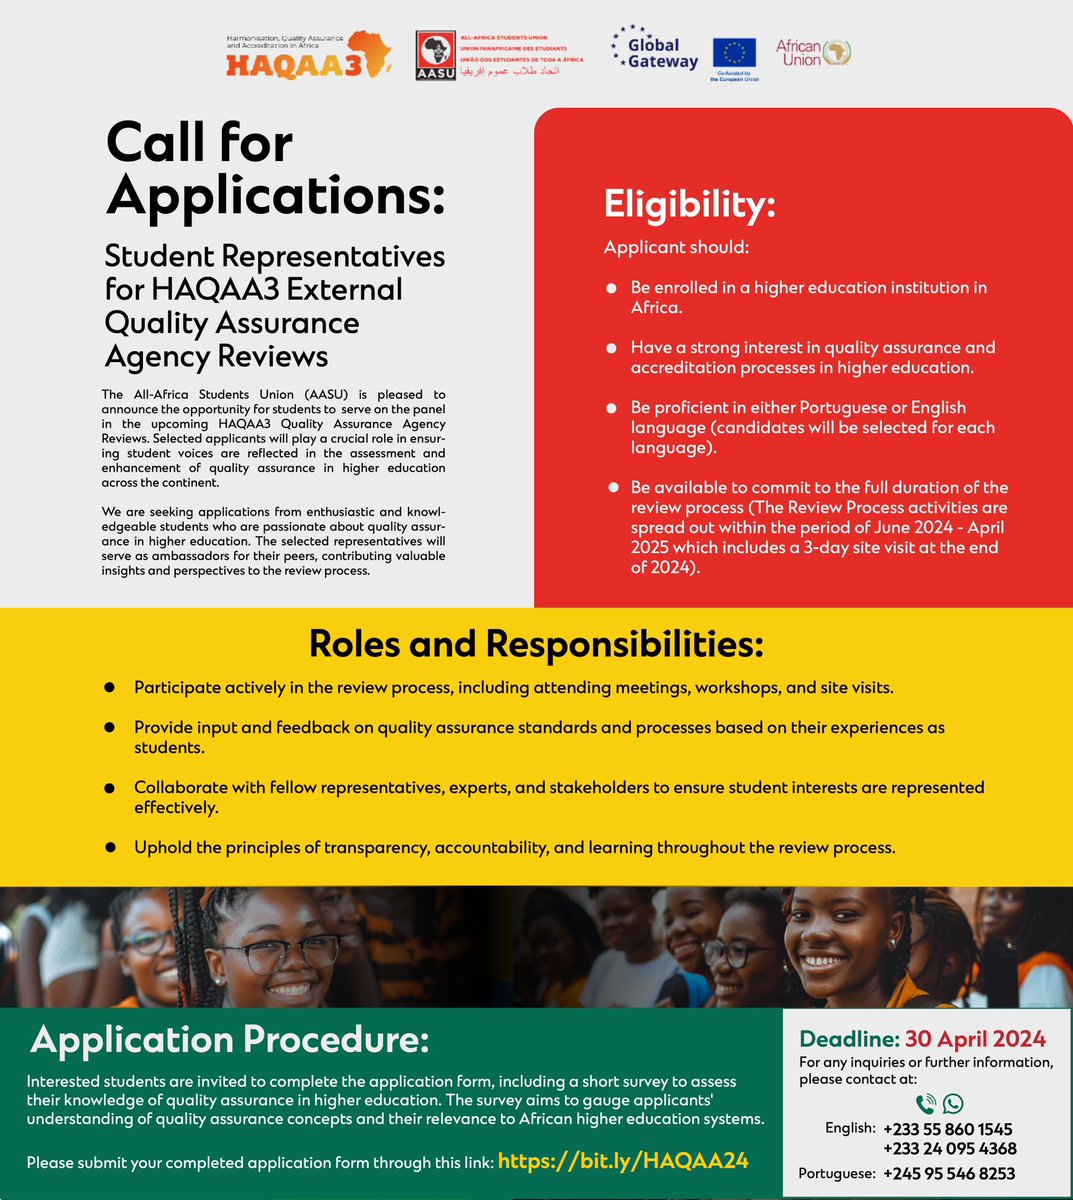 CALL FOR STUDENT REPRESENTATIVES - HAQAA3 AGENCY REVIEWS! Passionate about Higher Ed Quality Assurance? Join us in shaping the future of African Higher Ed! Apply by April 30, 2024, to contribute your perspective. Apply Here: form.jotform.com/240904630069555